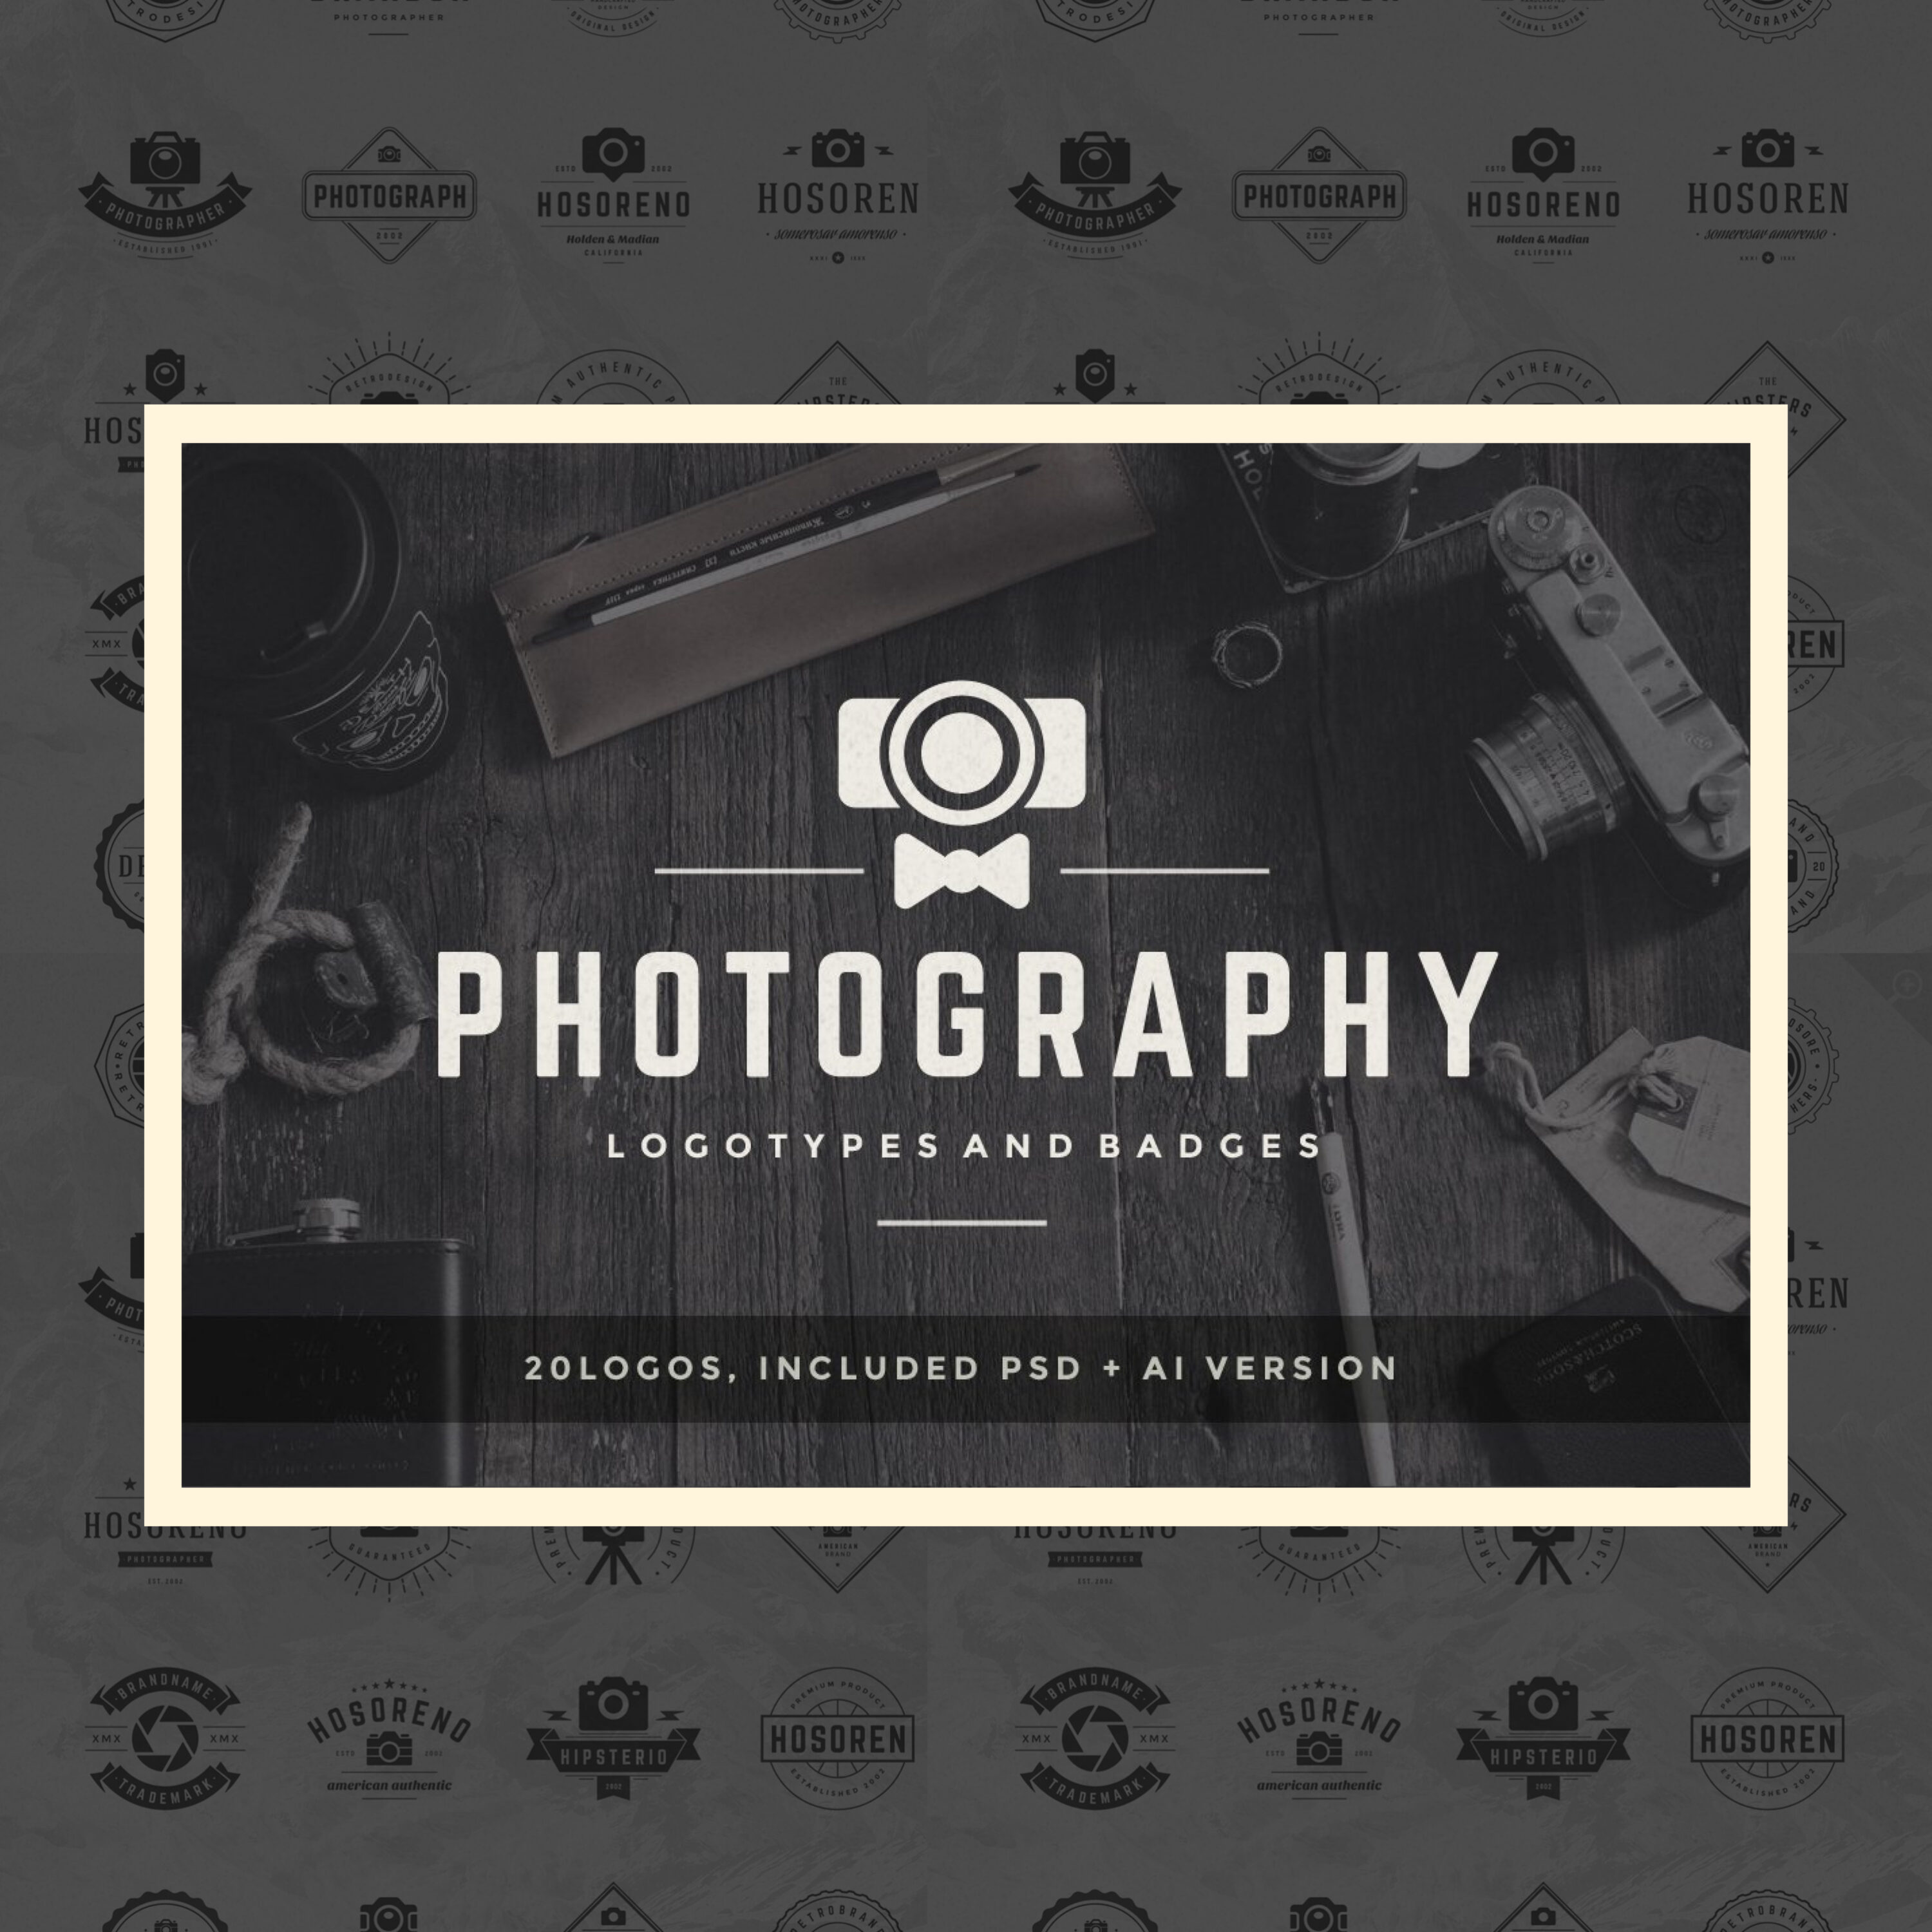 Images with photography logos and badges.